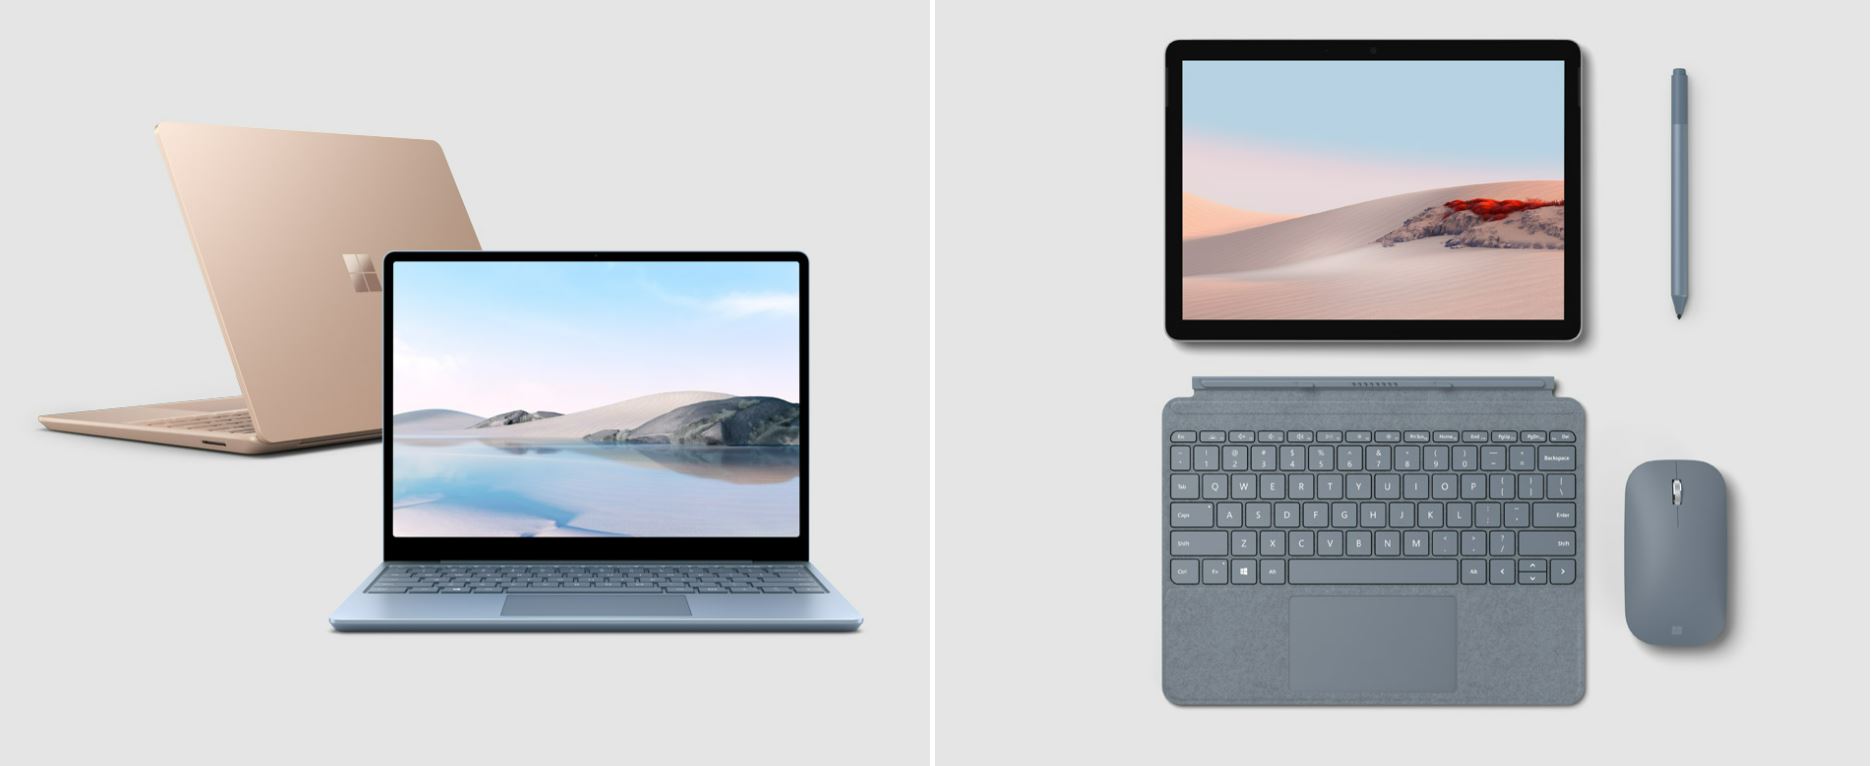 Microsoft’s upcoming Surface device could be game-changing.